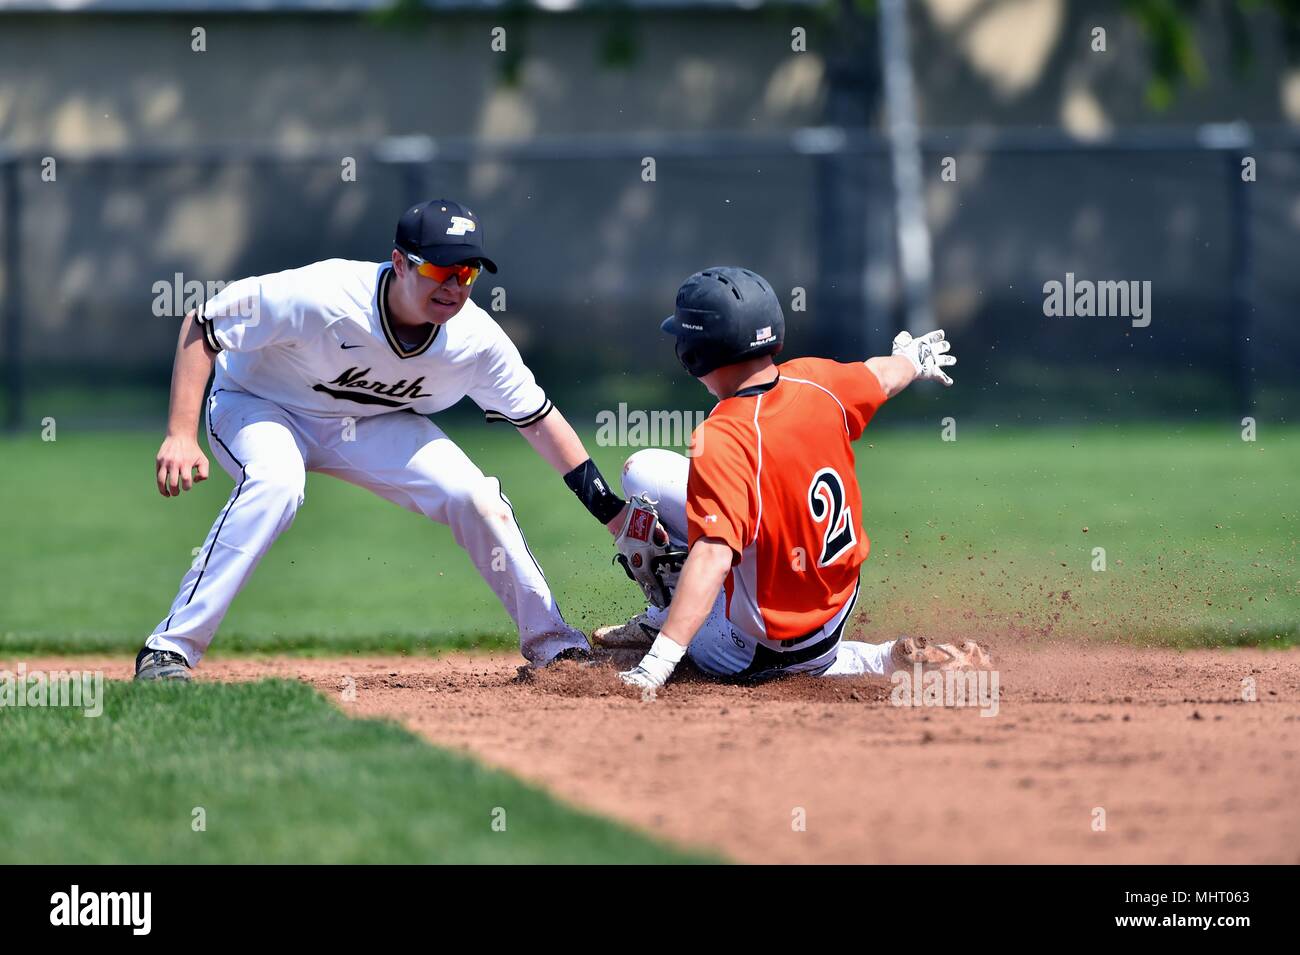 Shortstop applying a tag on a baserunner too late to prevent him from advancing to second on a wild pitch. USA. Stock Photo